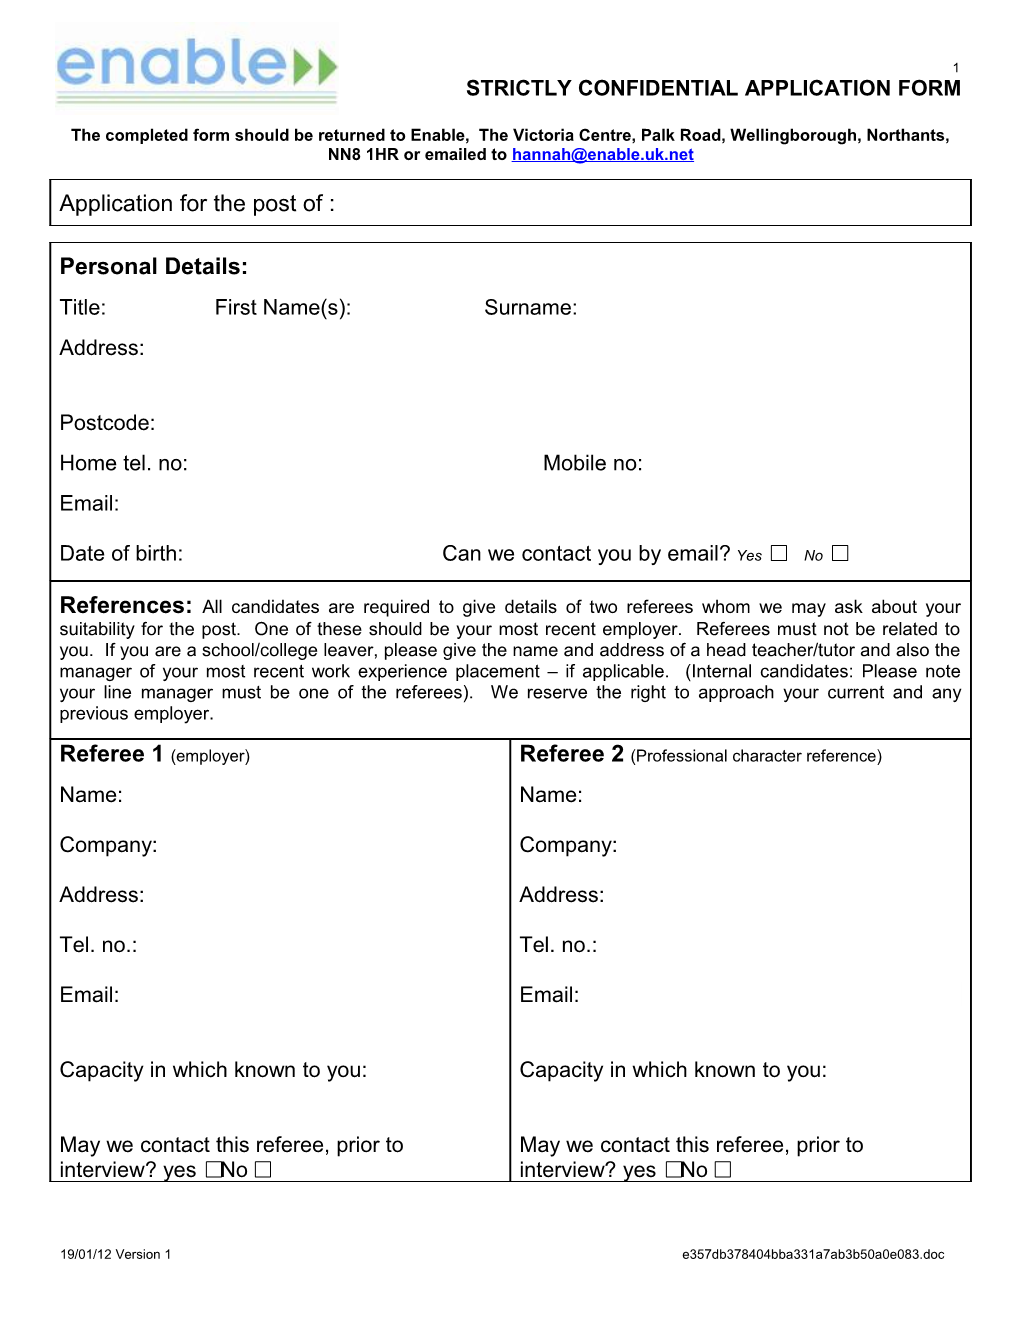 Strictly Confidential Application Form